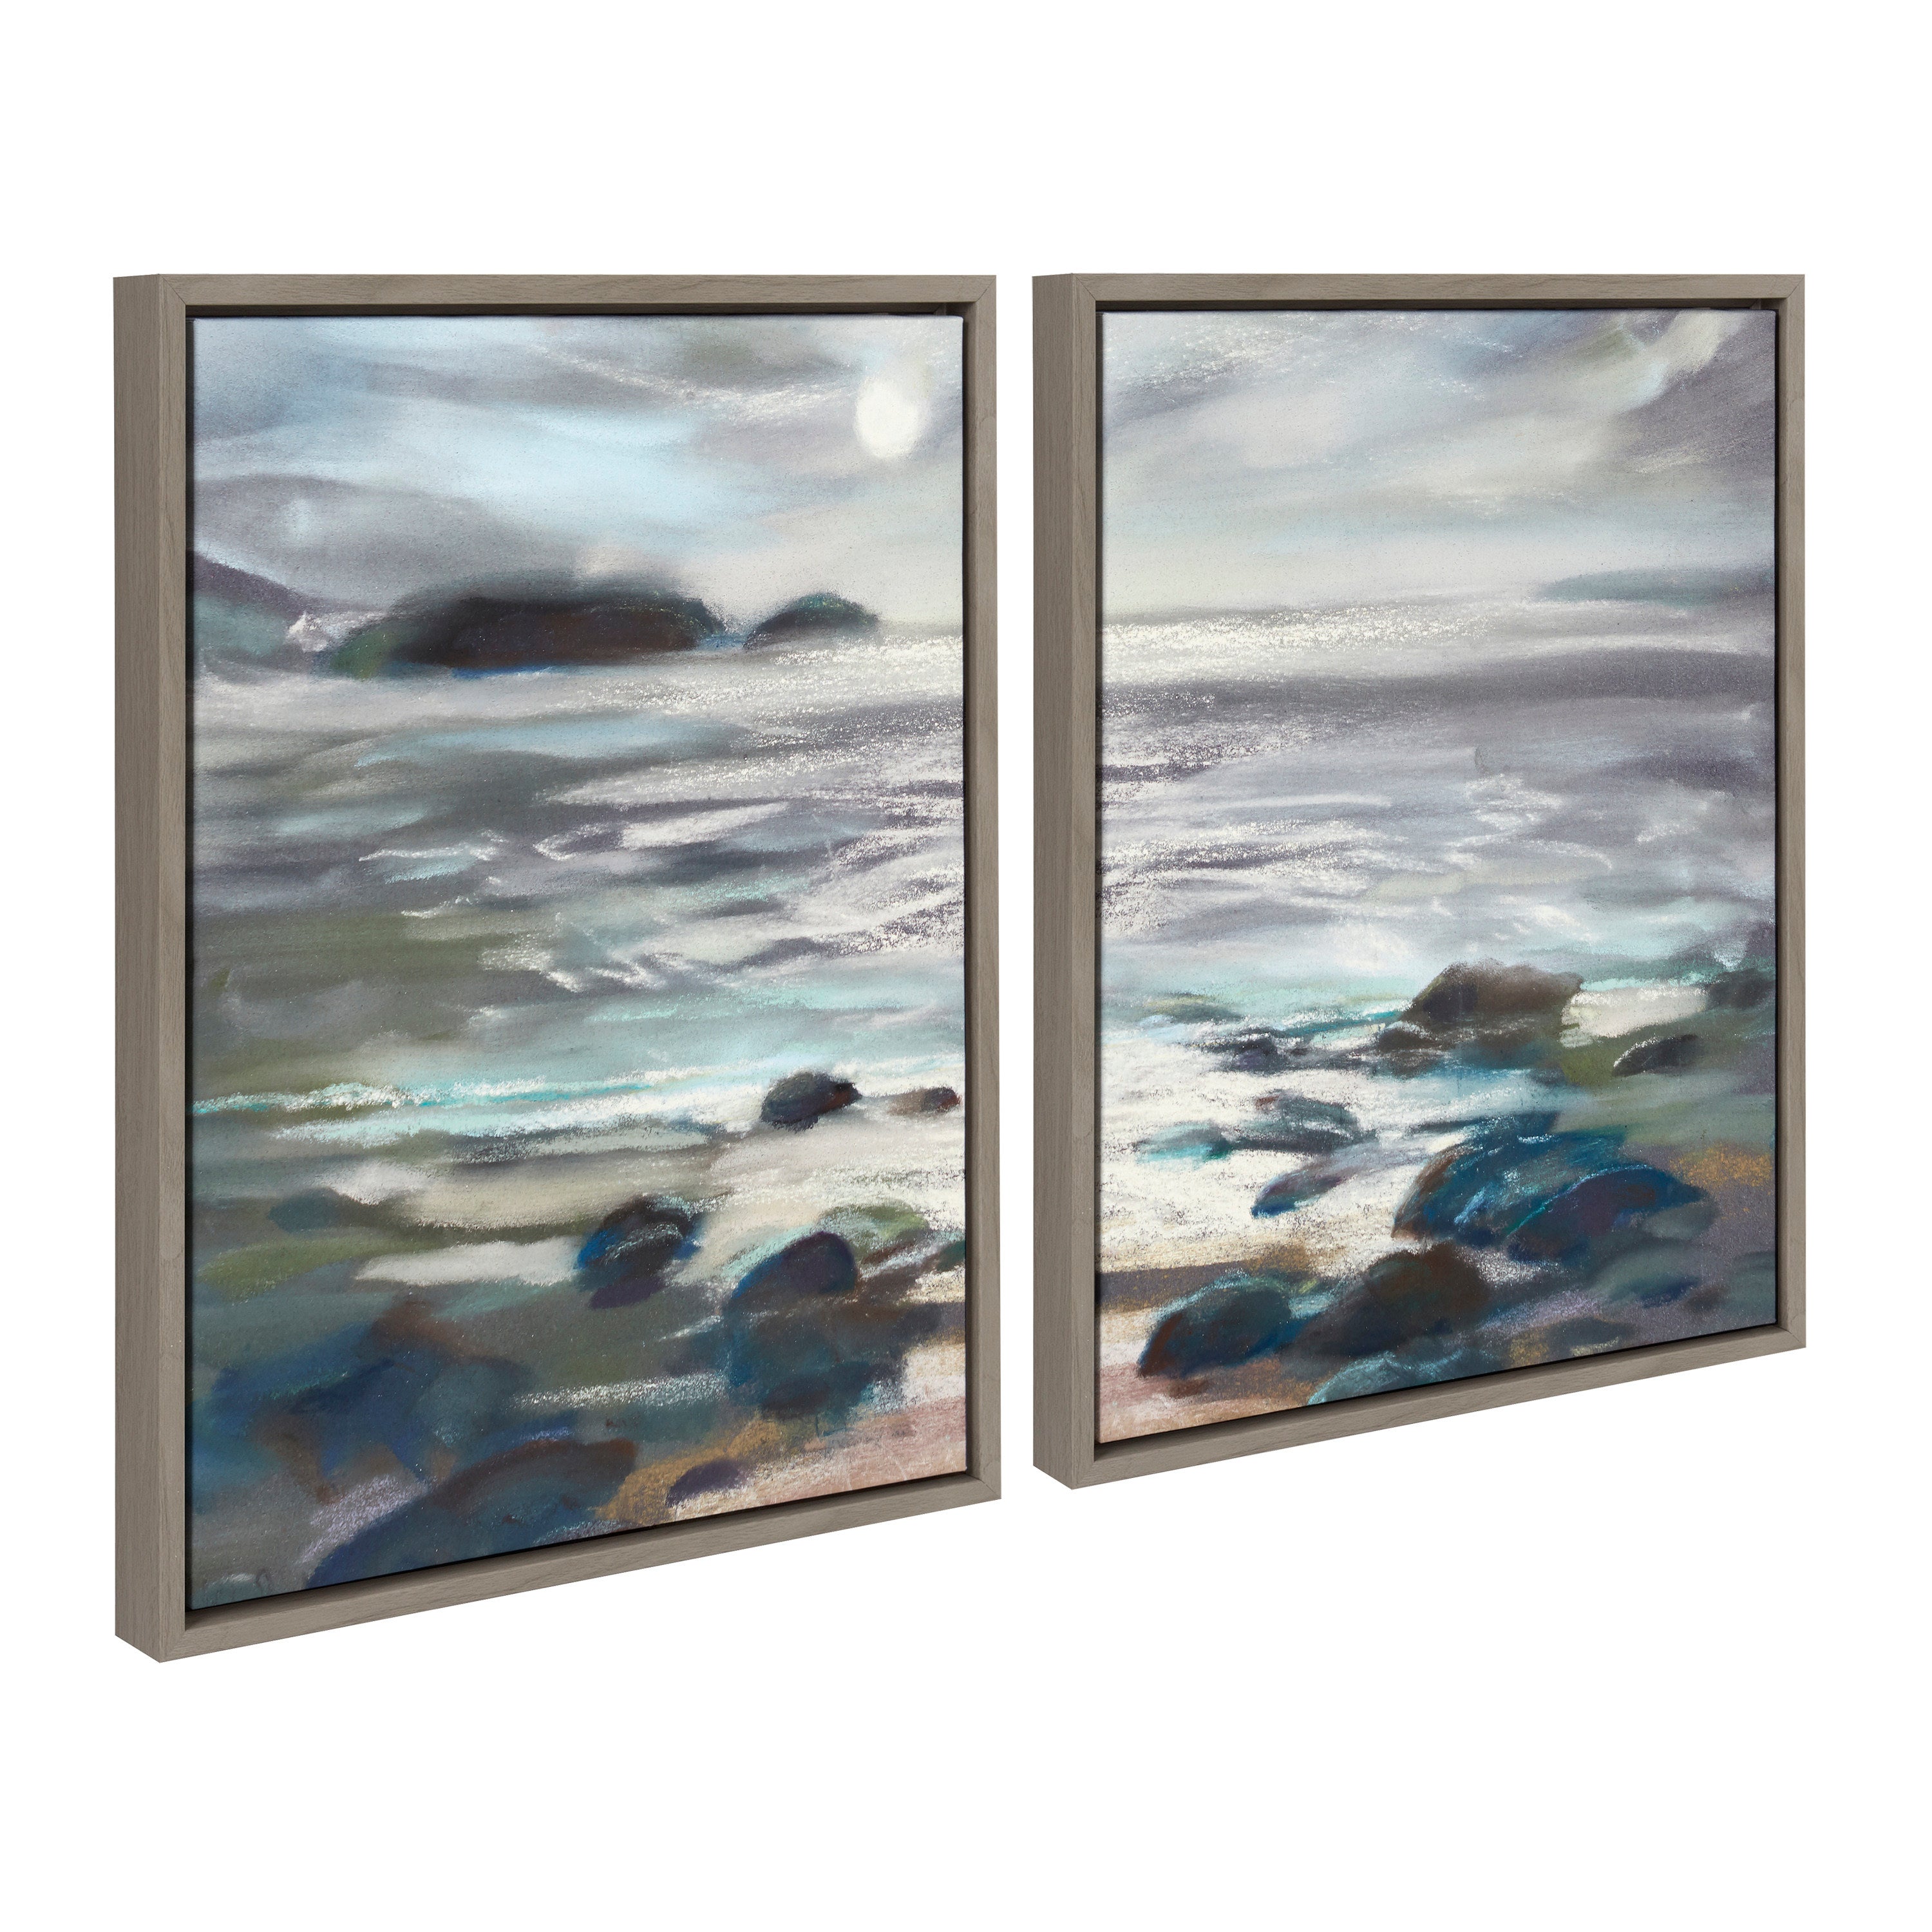 Sylvie Moonlight Becomes You I and II Framed Canvas Art Set by Nel Whatmore